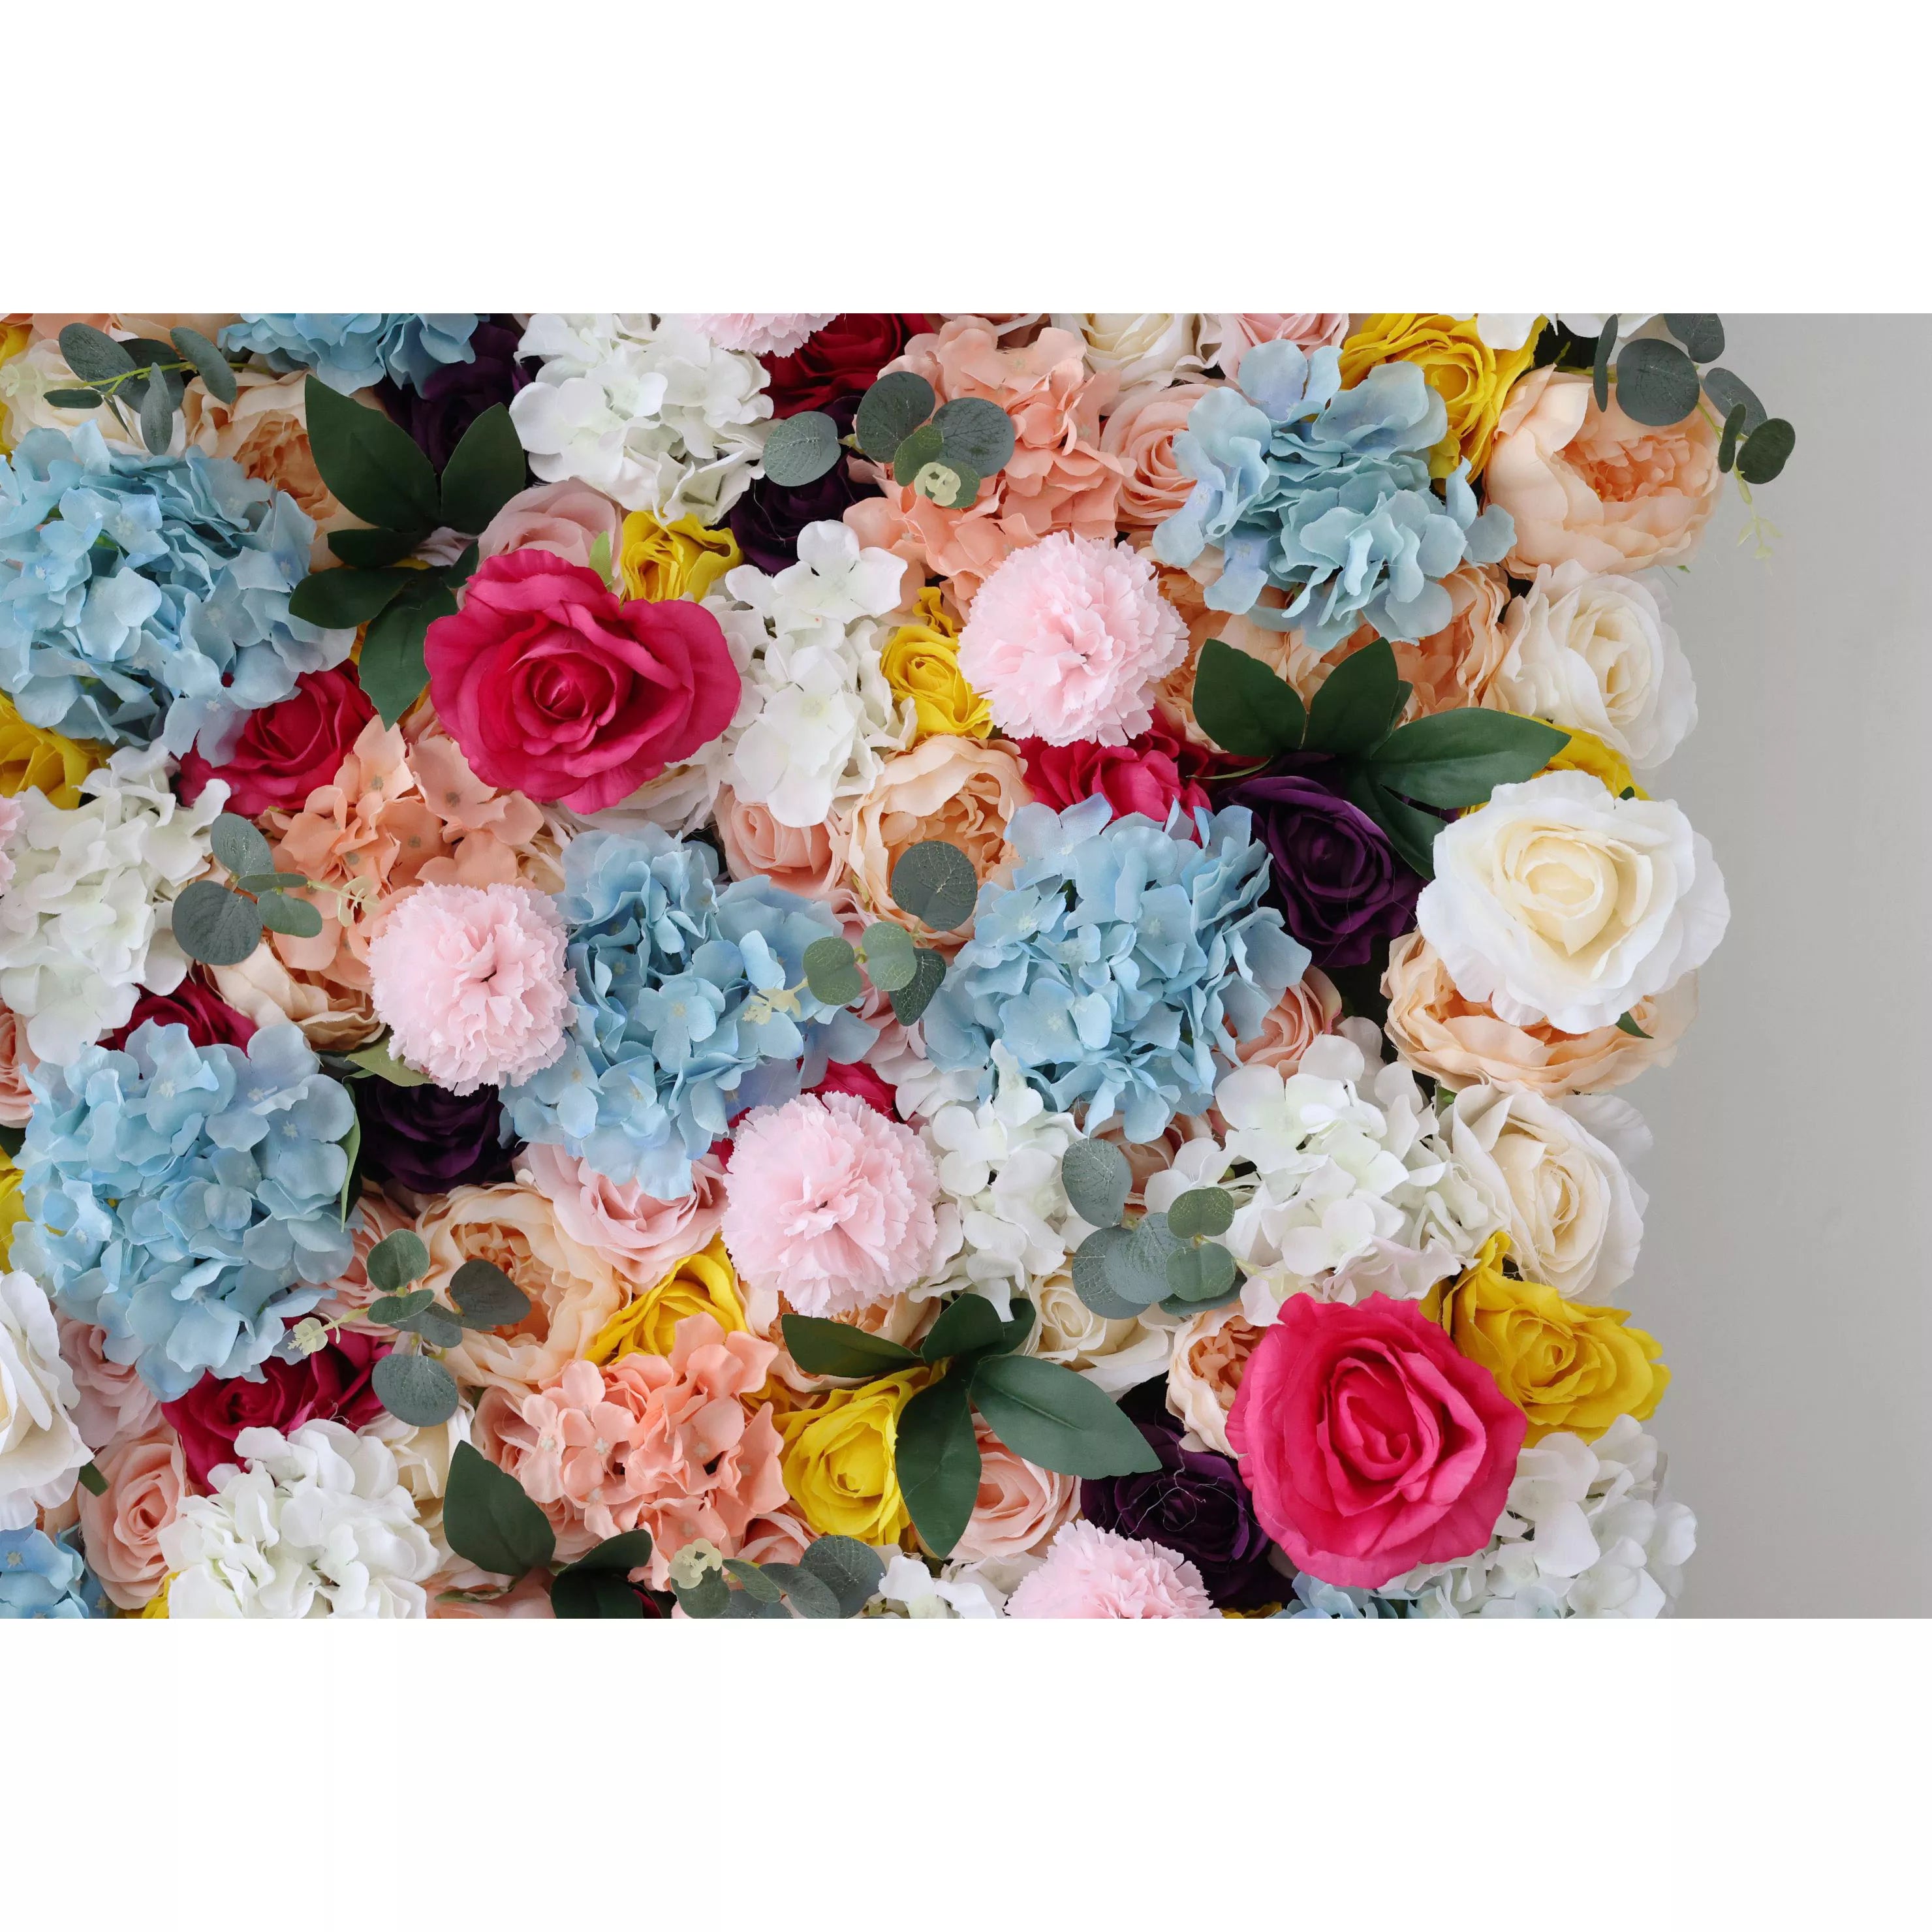 ValarFlower Artificial Floral Wall Backdrop: Blooming Spectrum - A Vibrant Symphony of Colors-VF-243